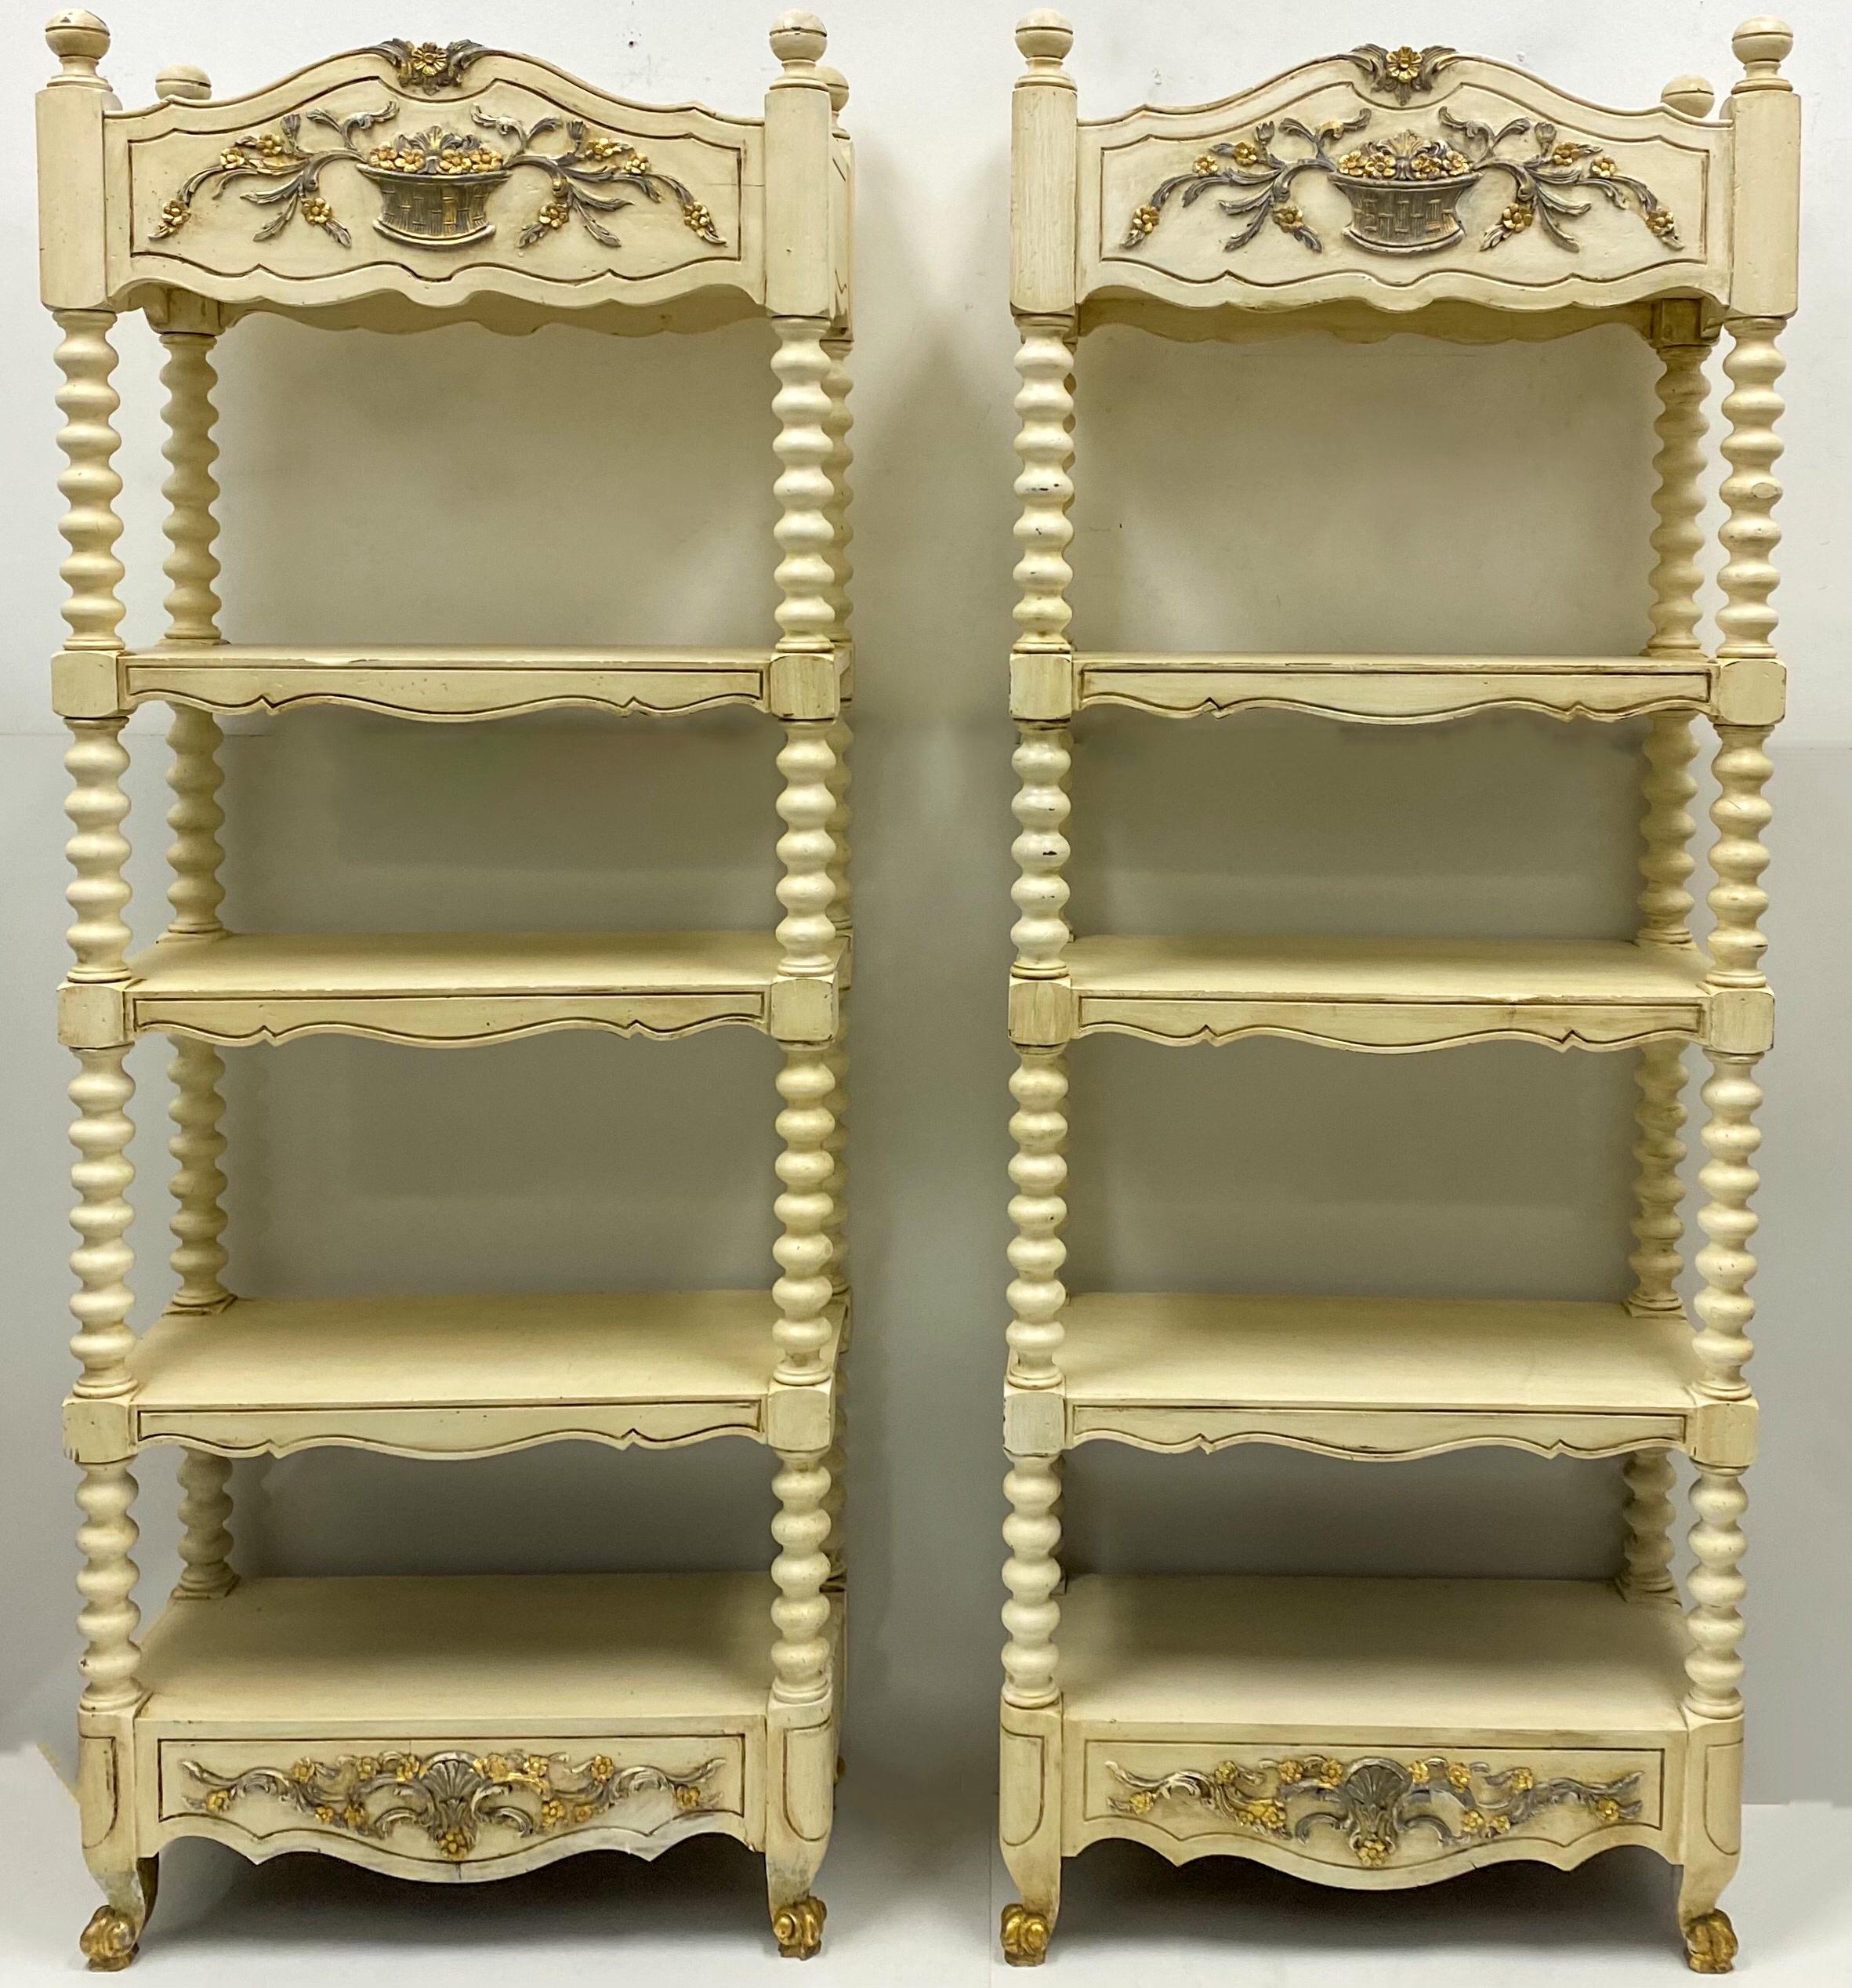 This is a pair of 1950s Maison Jansen French painted and carved étagères with spool supports. They are ivory with gray and gilt accents. They are stamped. From floor to shelves, the heights are as follows: 10.5”, 23”, 39.5”, 52”, 65.5” to the top